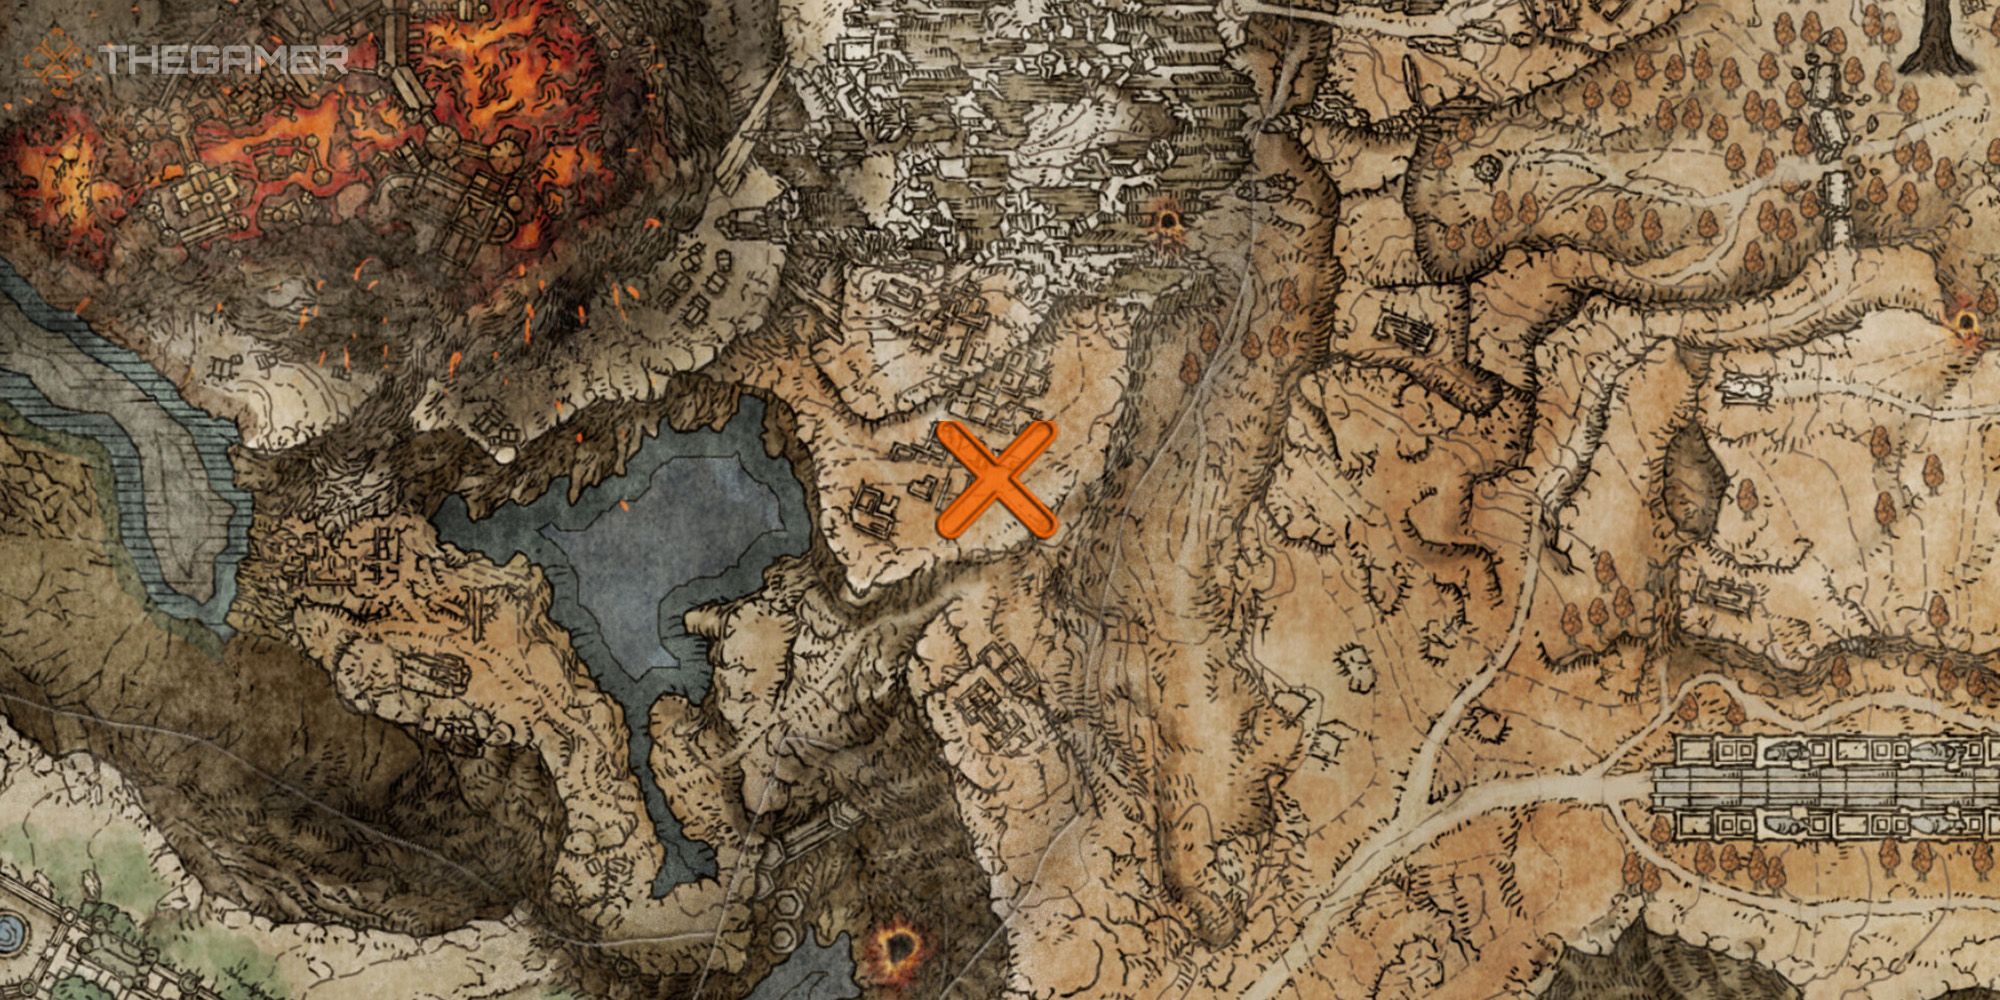 Map showing the location of the Tibia's Summons Sorcery in Elden Ring